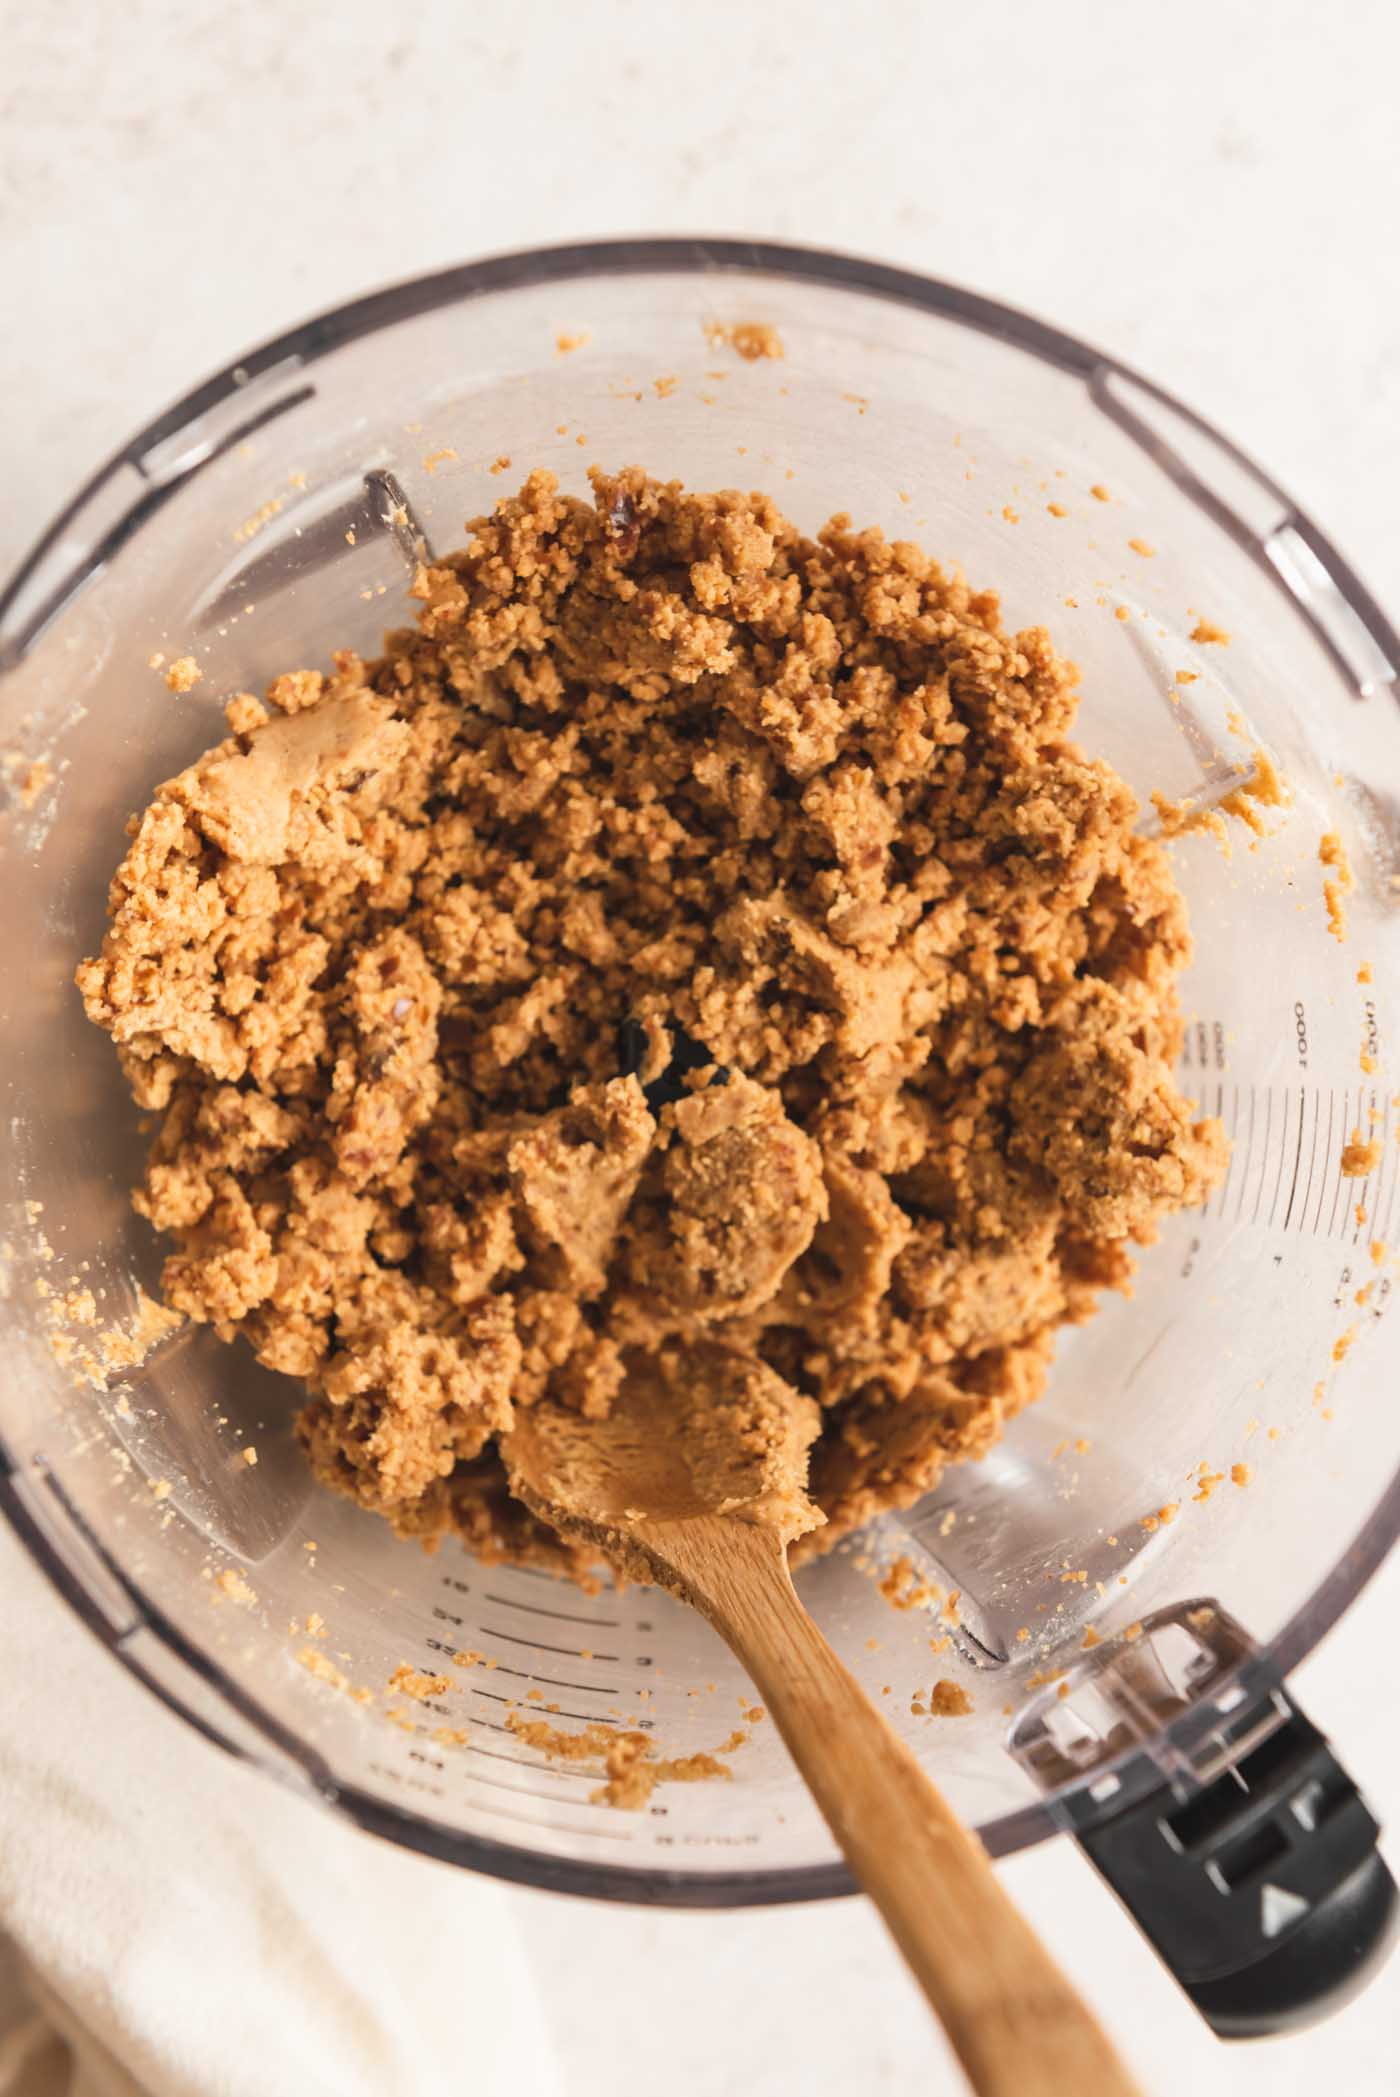 A crumbly peanut butter dough mixture in the container of a food processor with a small wooden spoon resting in it.